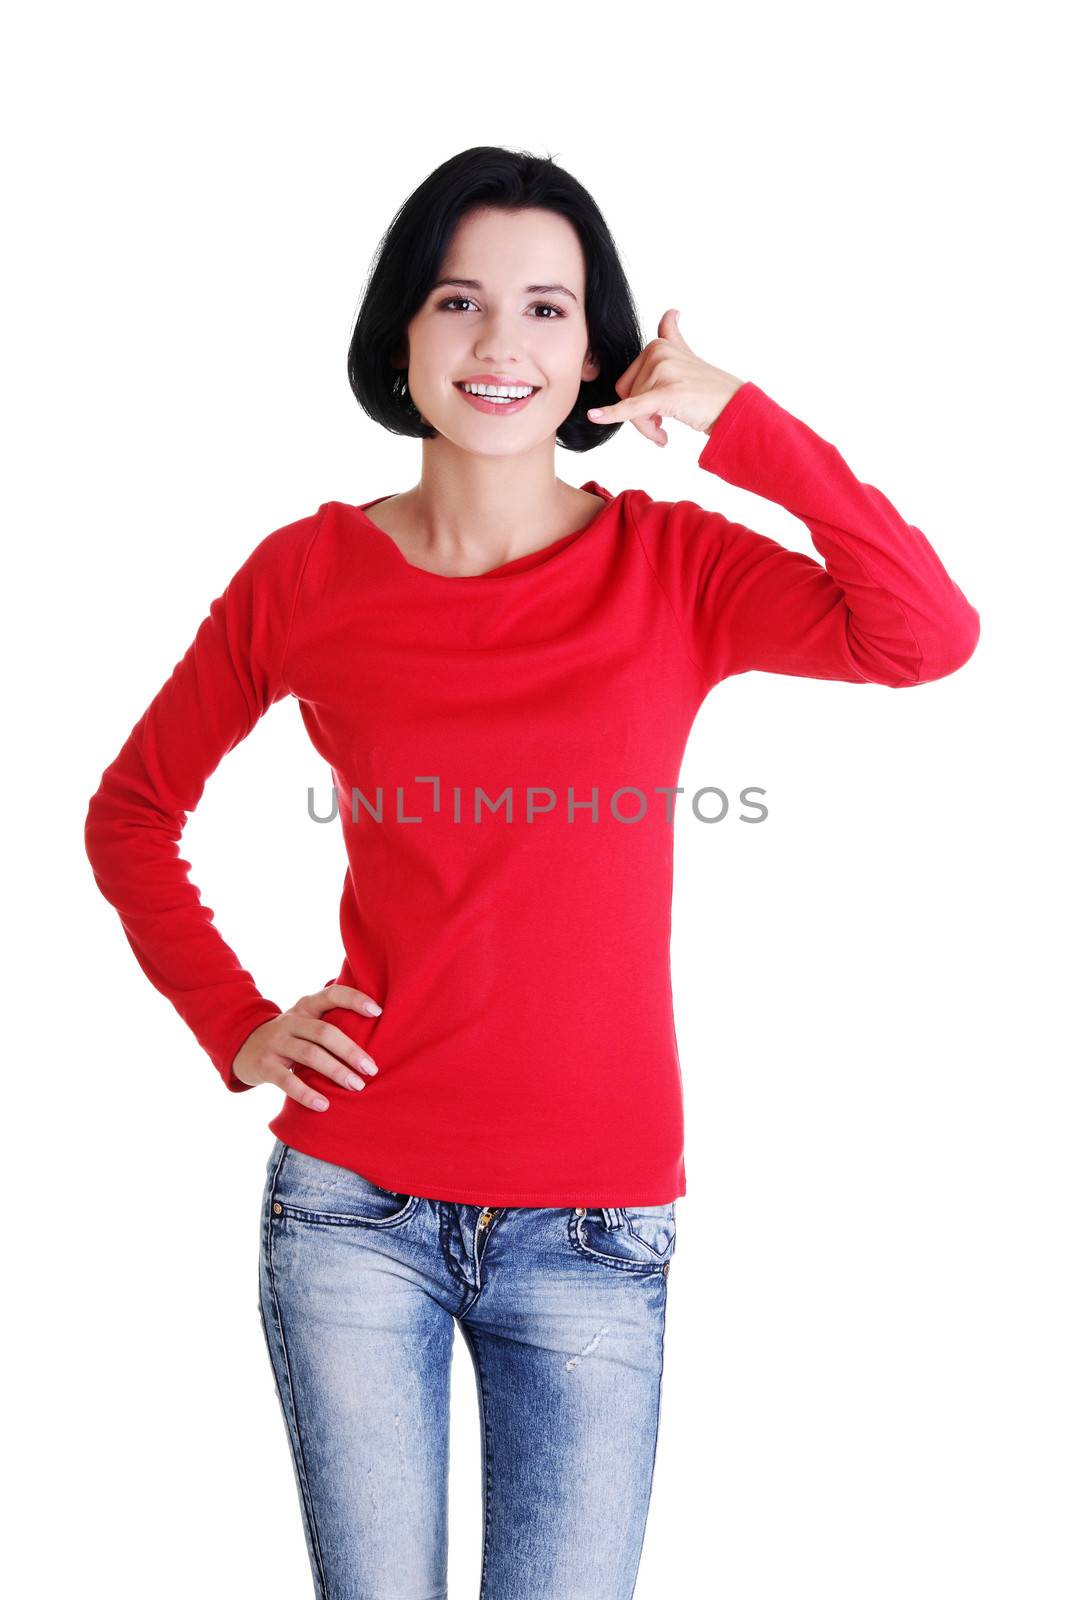 Young happy woman gesturing "call me"